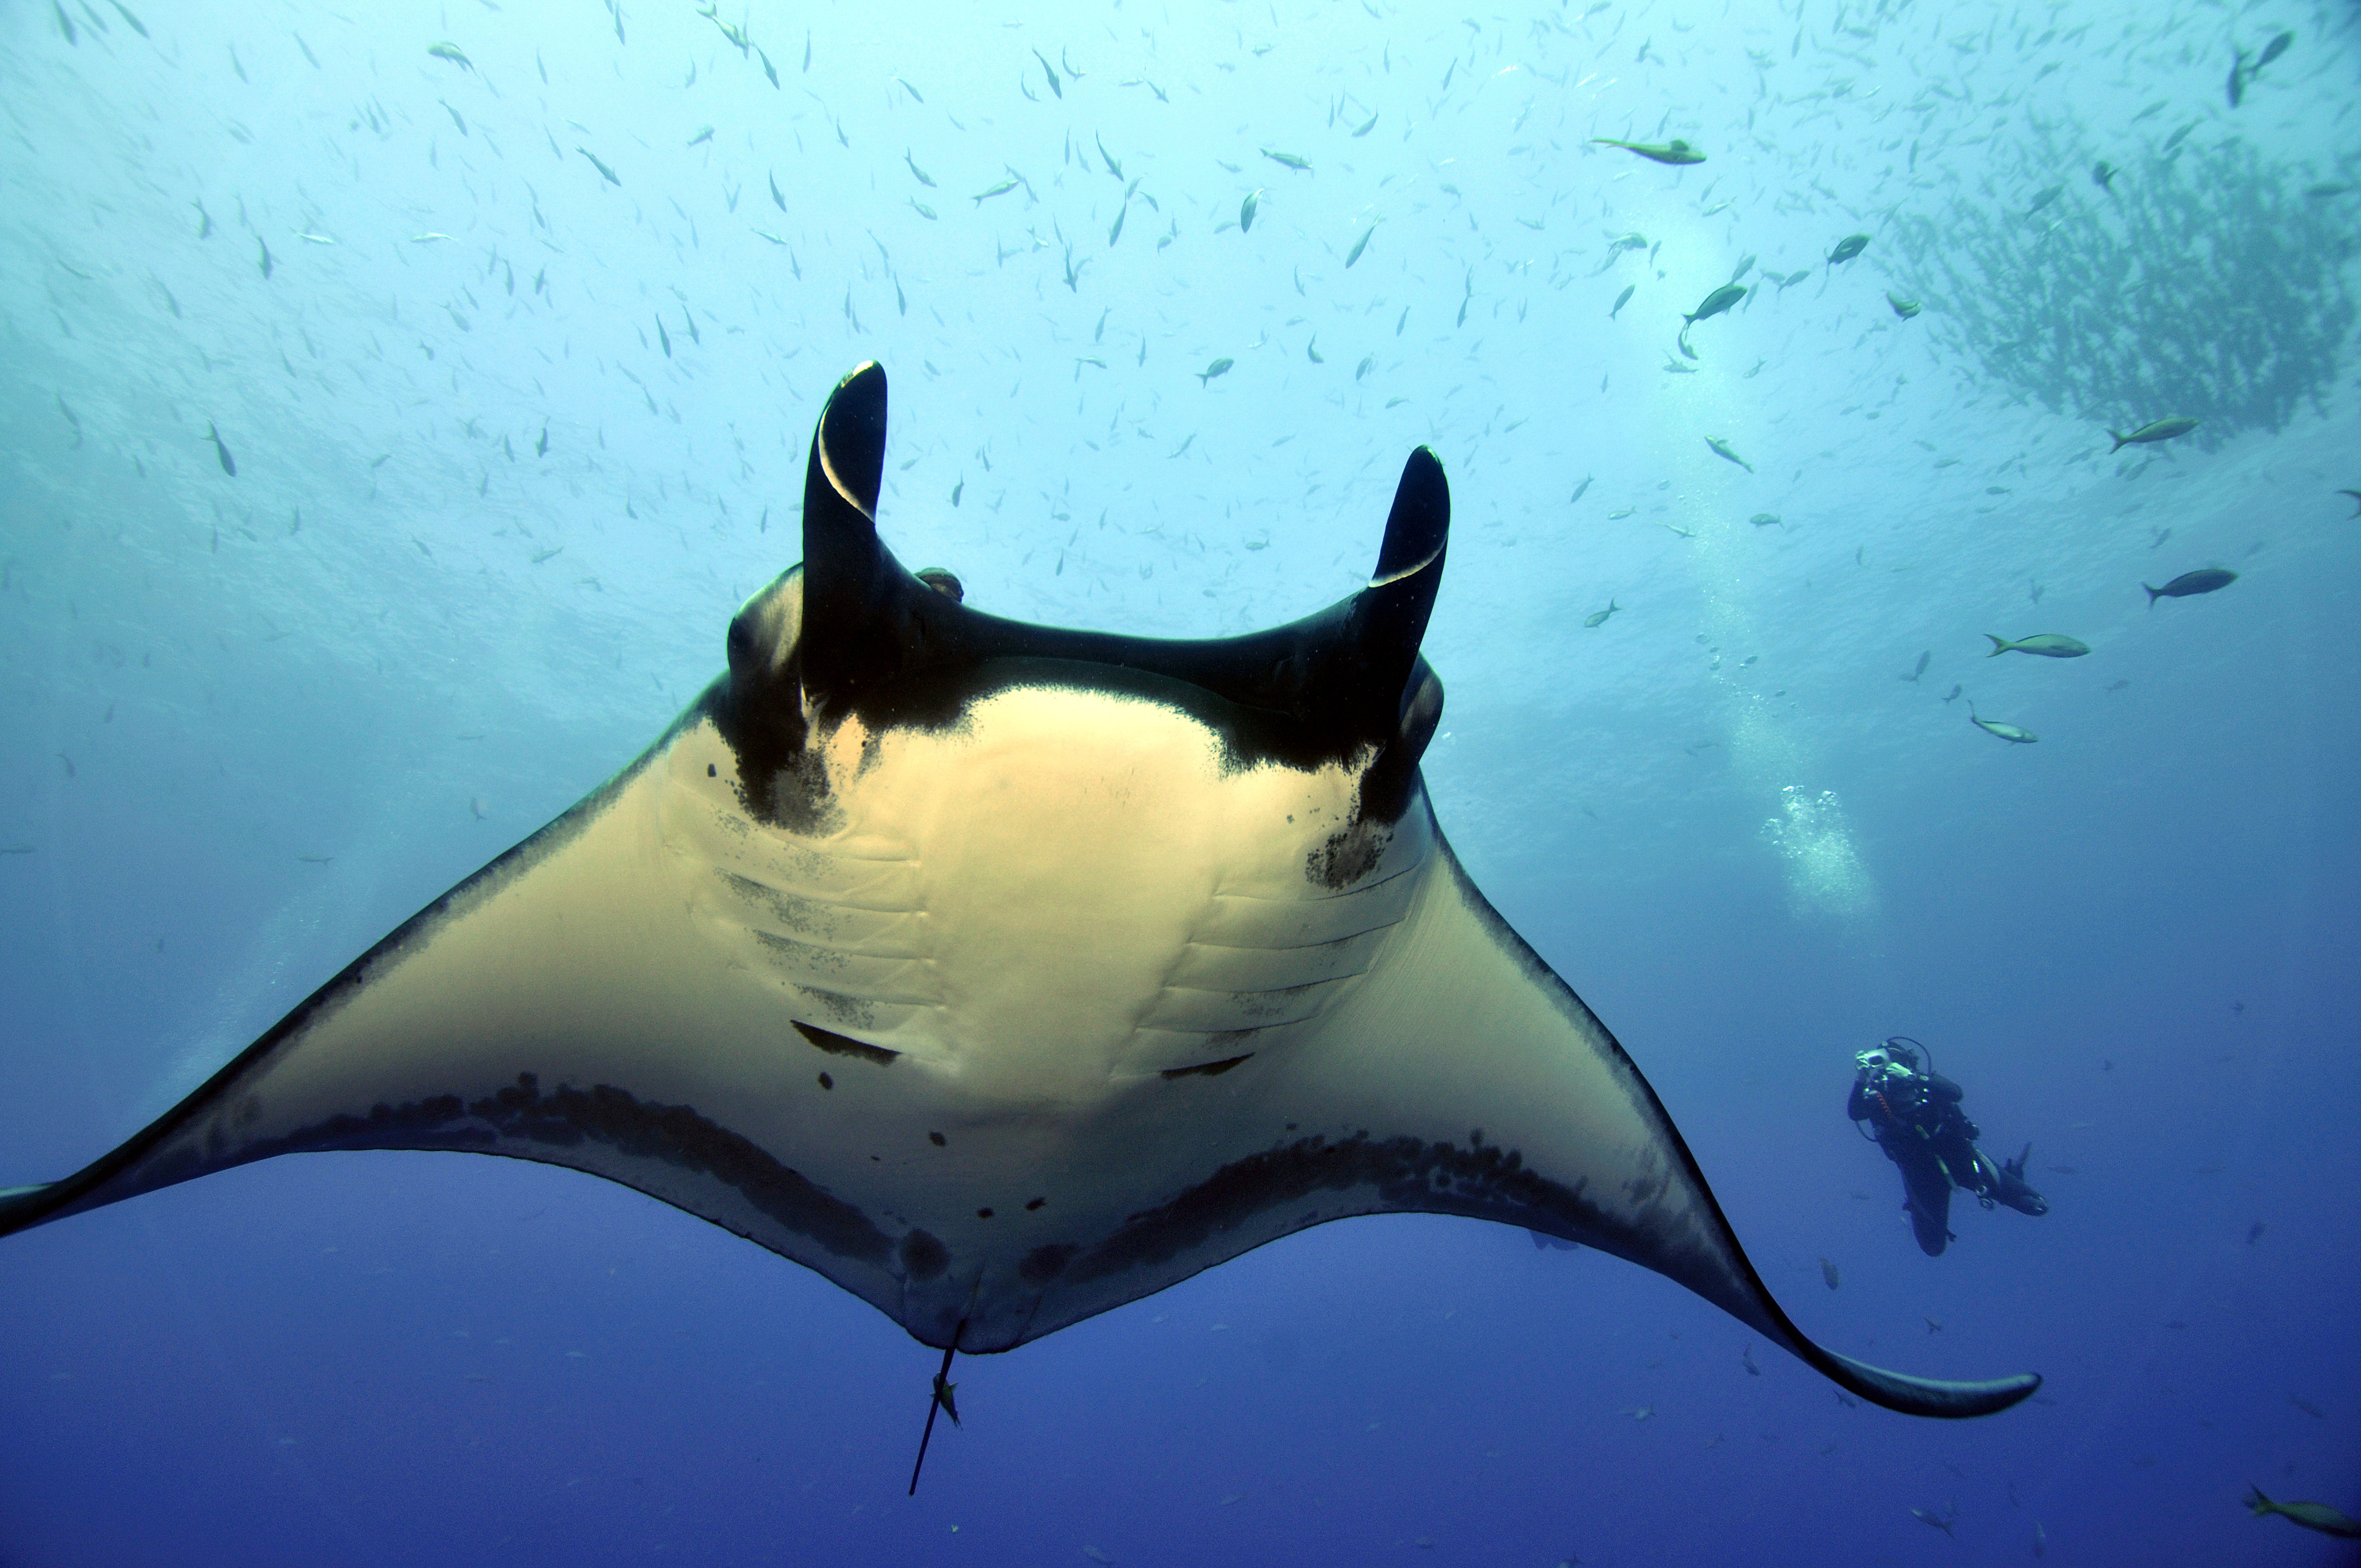 Large manta ray poses for diver photos as another diver looks on in the distance at Los Arcos dive site in Puerto Vallarta, Mexico